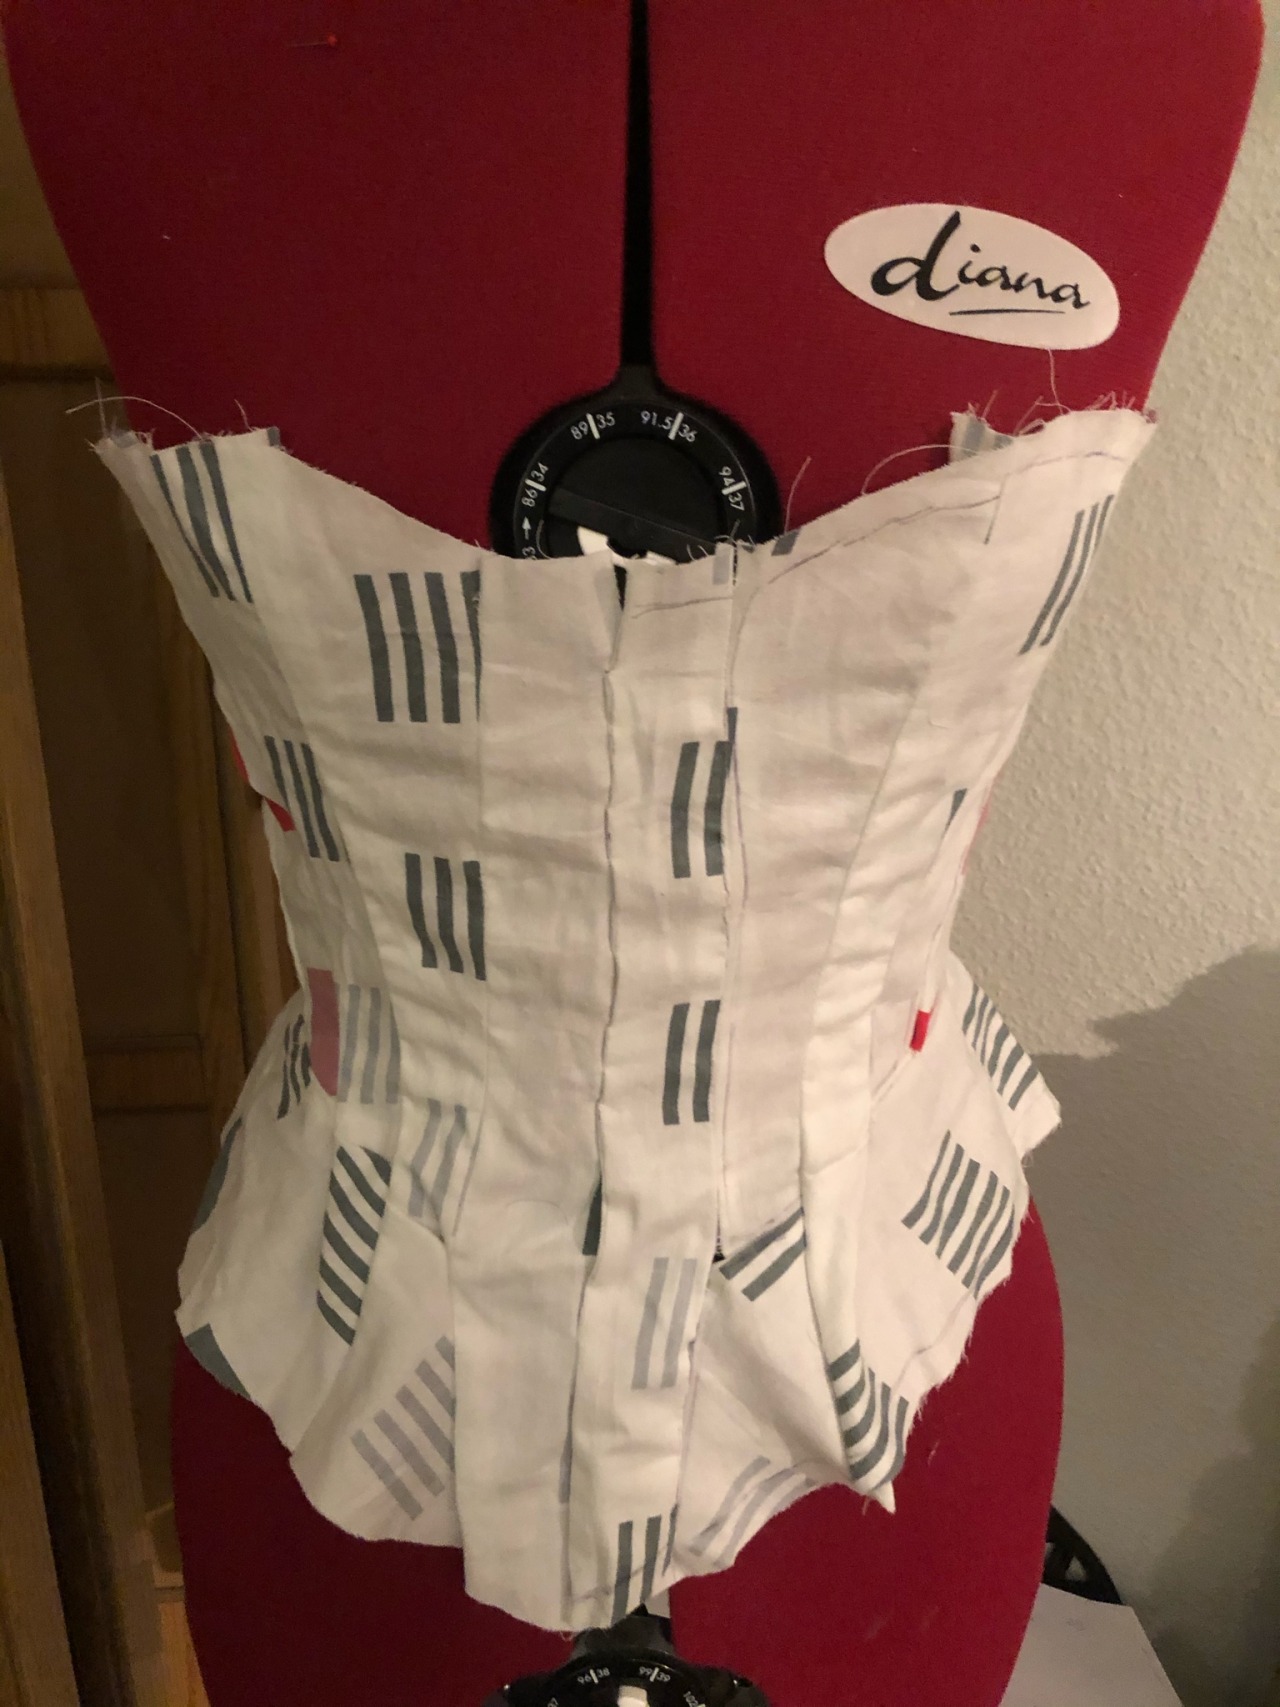 Edwardian S bend corset, self drafted patterns : r/sewing